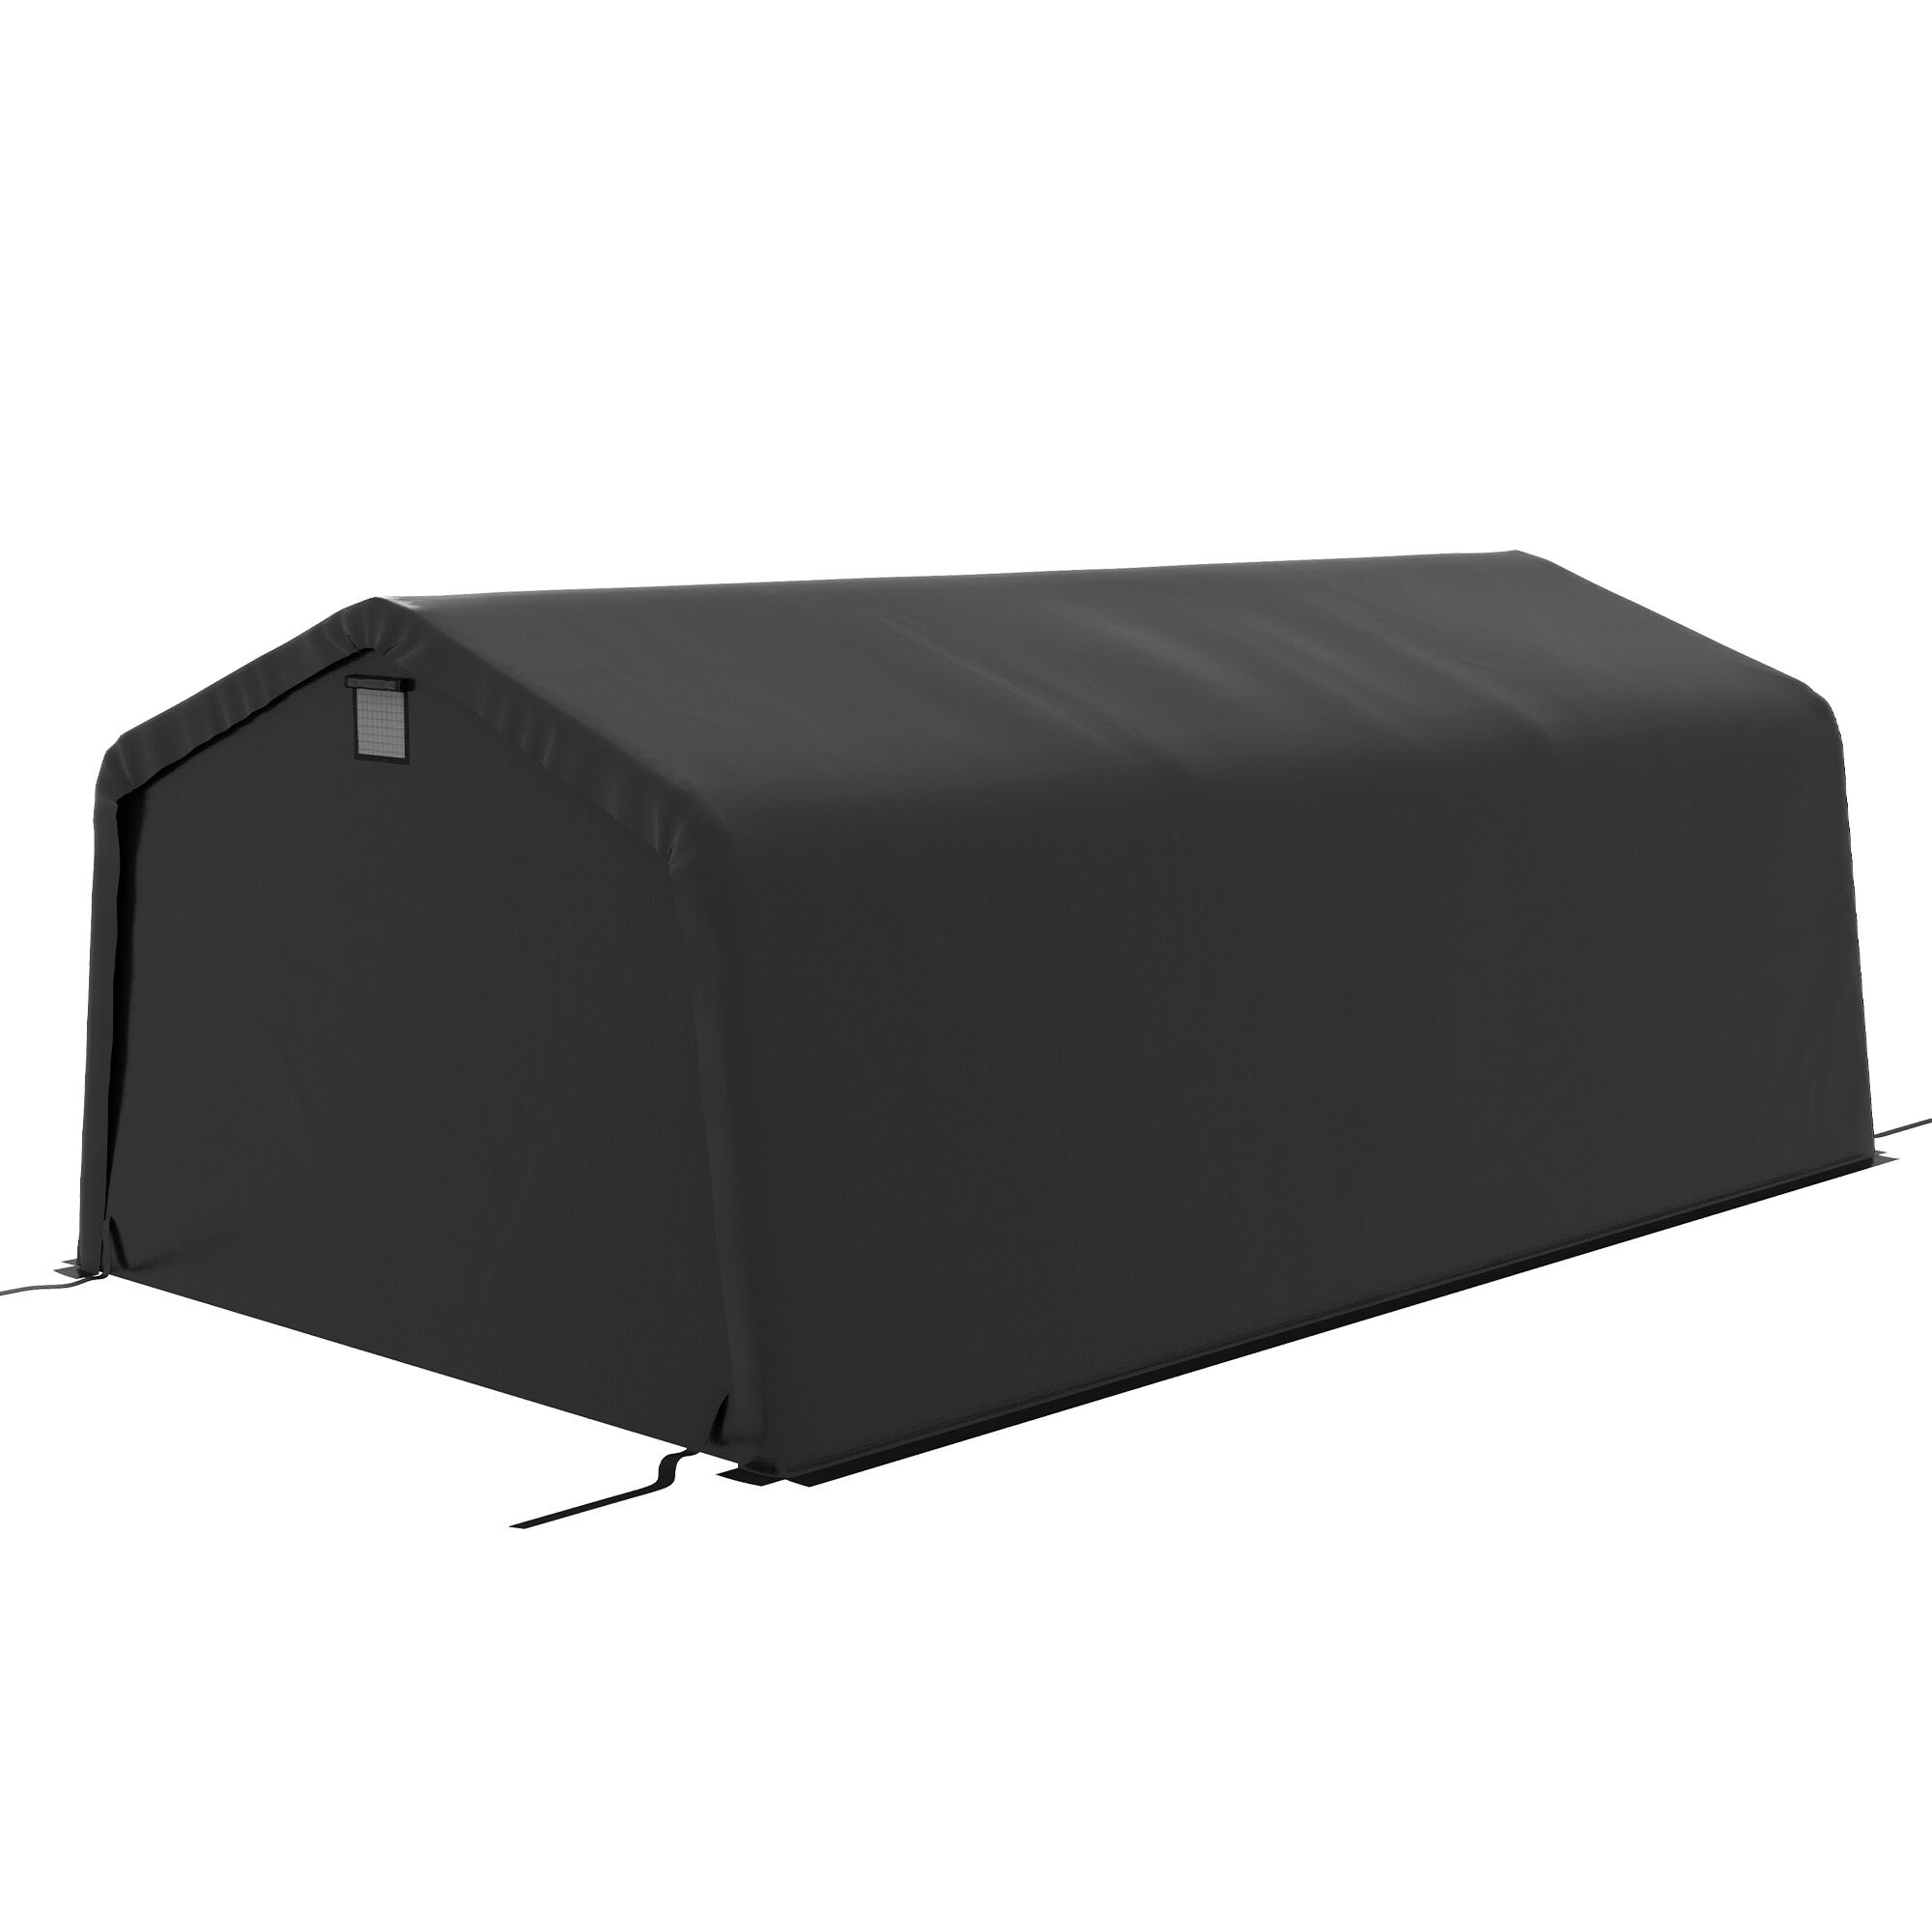 Outsunny Carport 12' x 20' Portable Garage, Heavy Duty Car Port Canopy with Ventilation Windows and Large Roll-up Door, Black